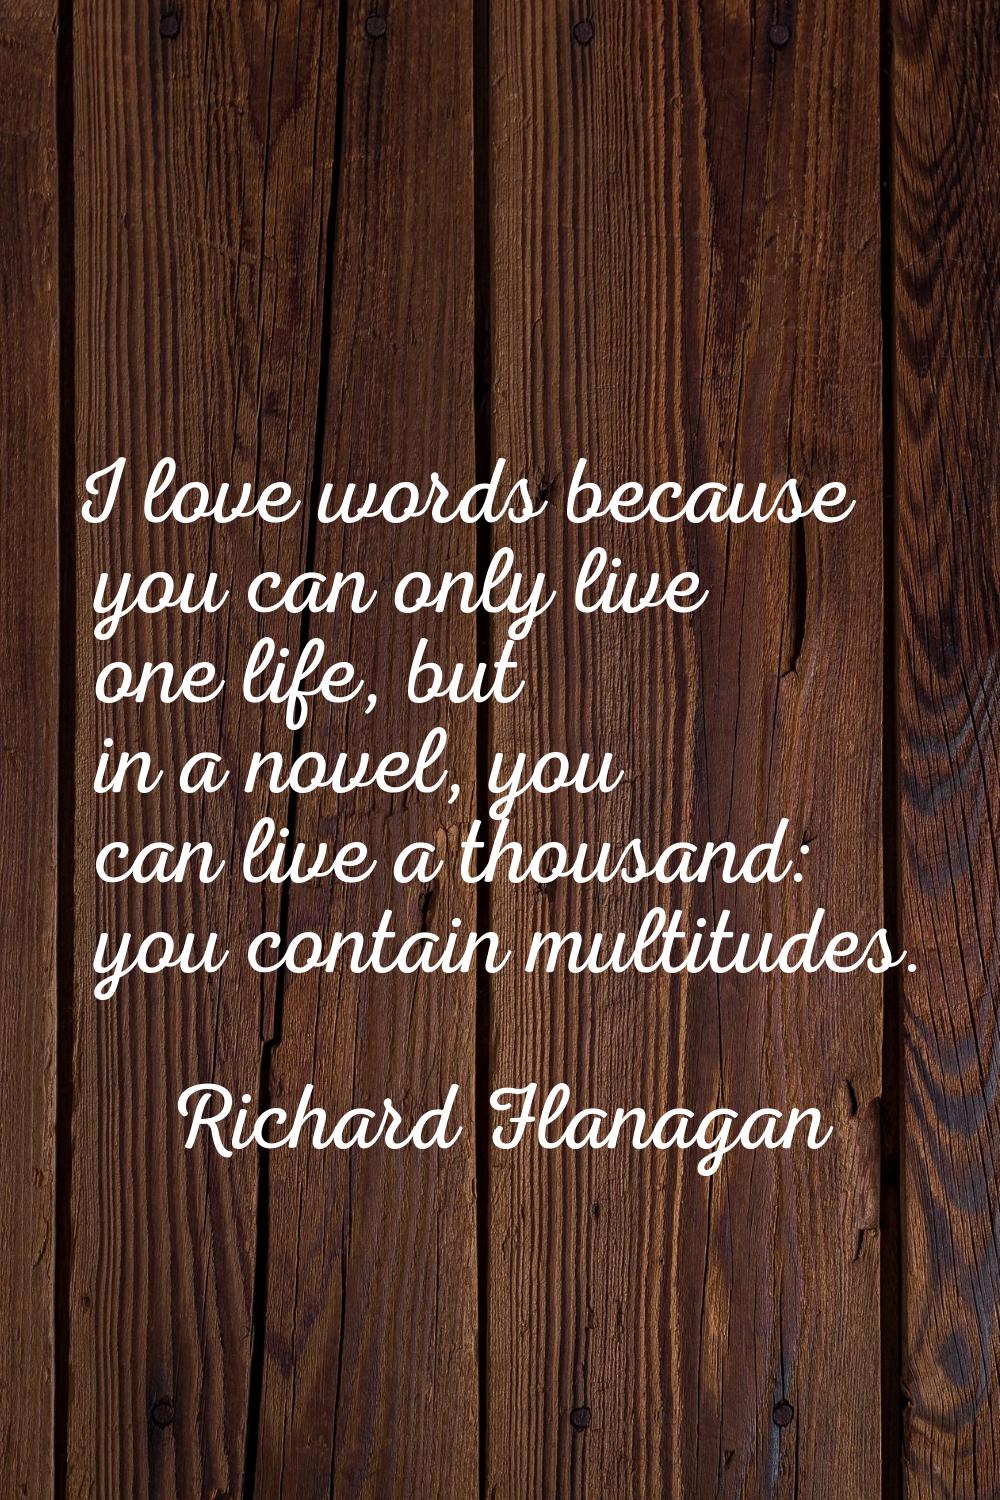 I love words because you can only live one life, but in a novel, you can live a thousand: you conta